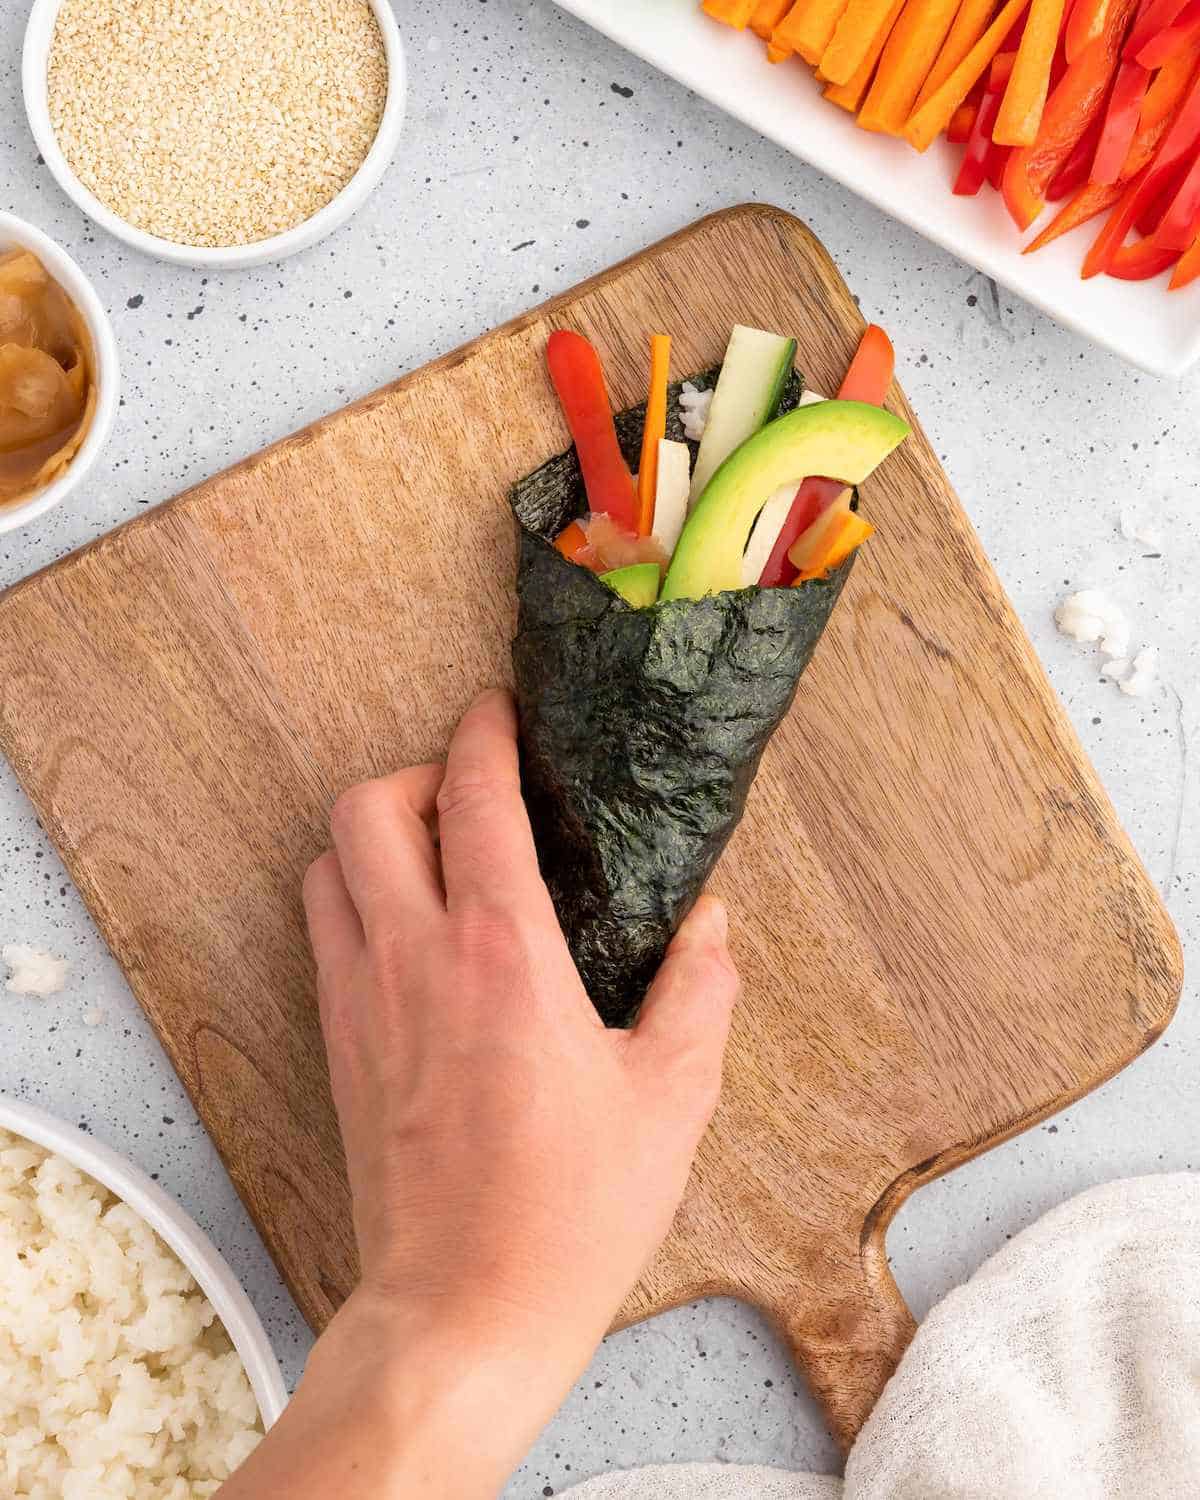 Sealing the finished temaki sushi hand roll.